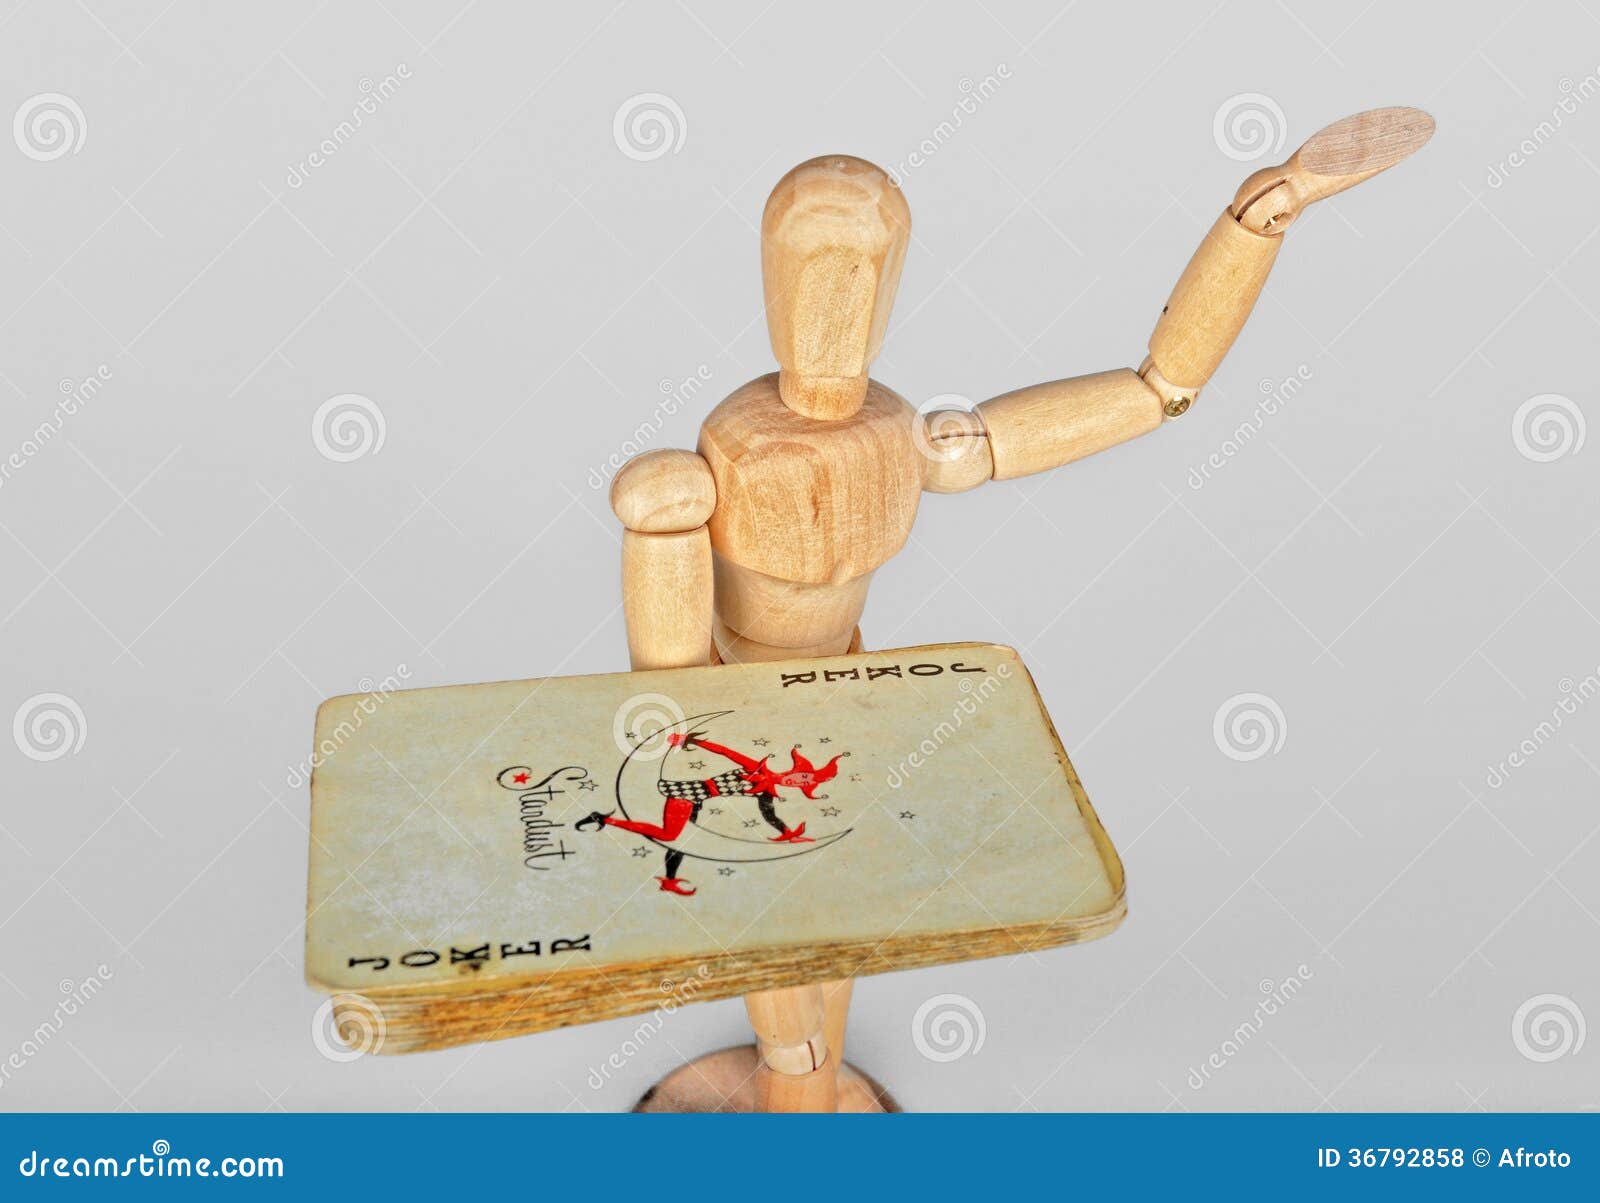 Wooden mannequin with playing cards. Old vintage poker cards in the hand of the wooden mannequin